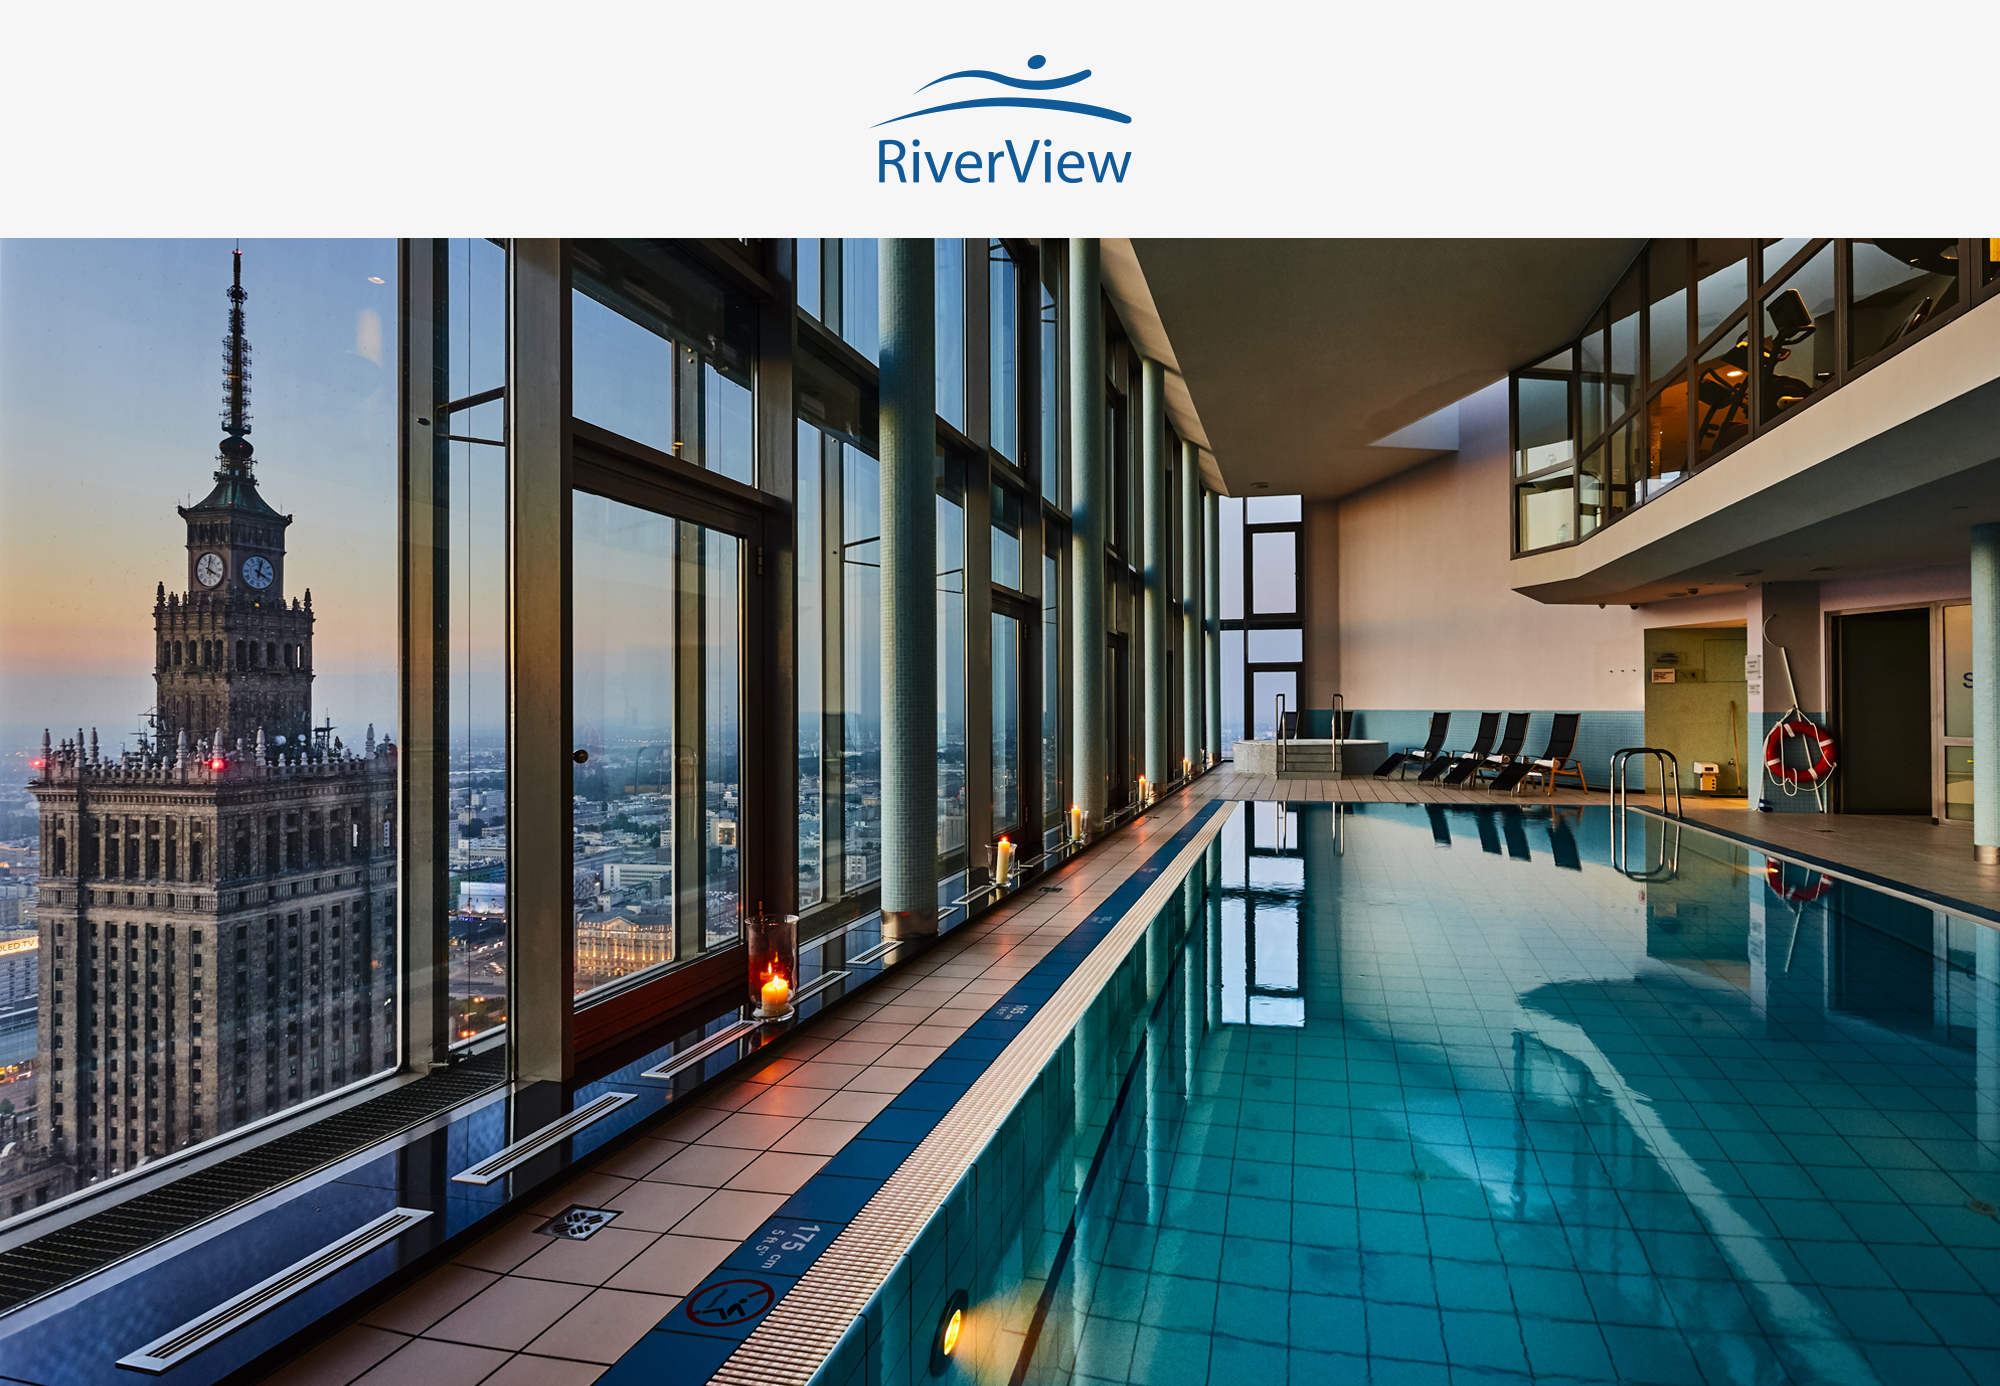 Relax at the RiverView Wellness Centre (Monday-Thursday) one person